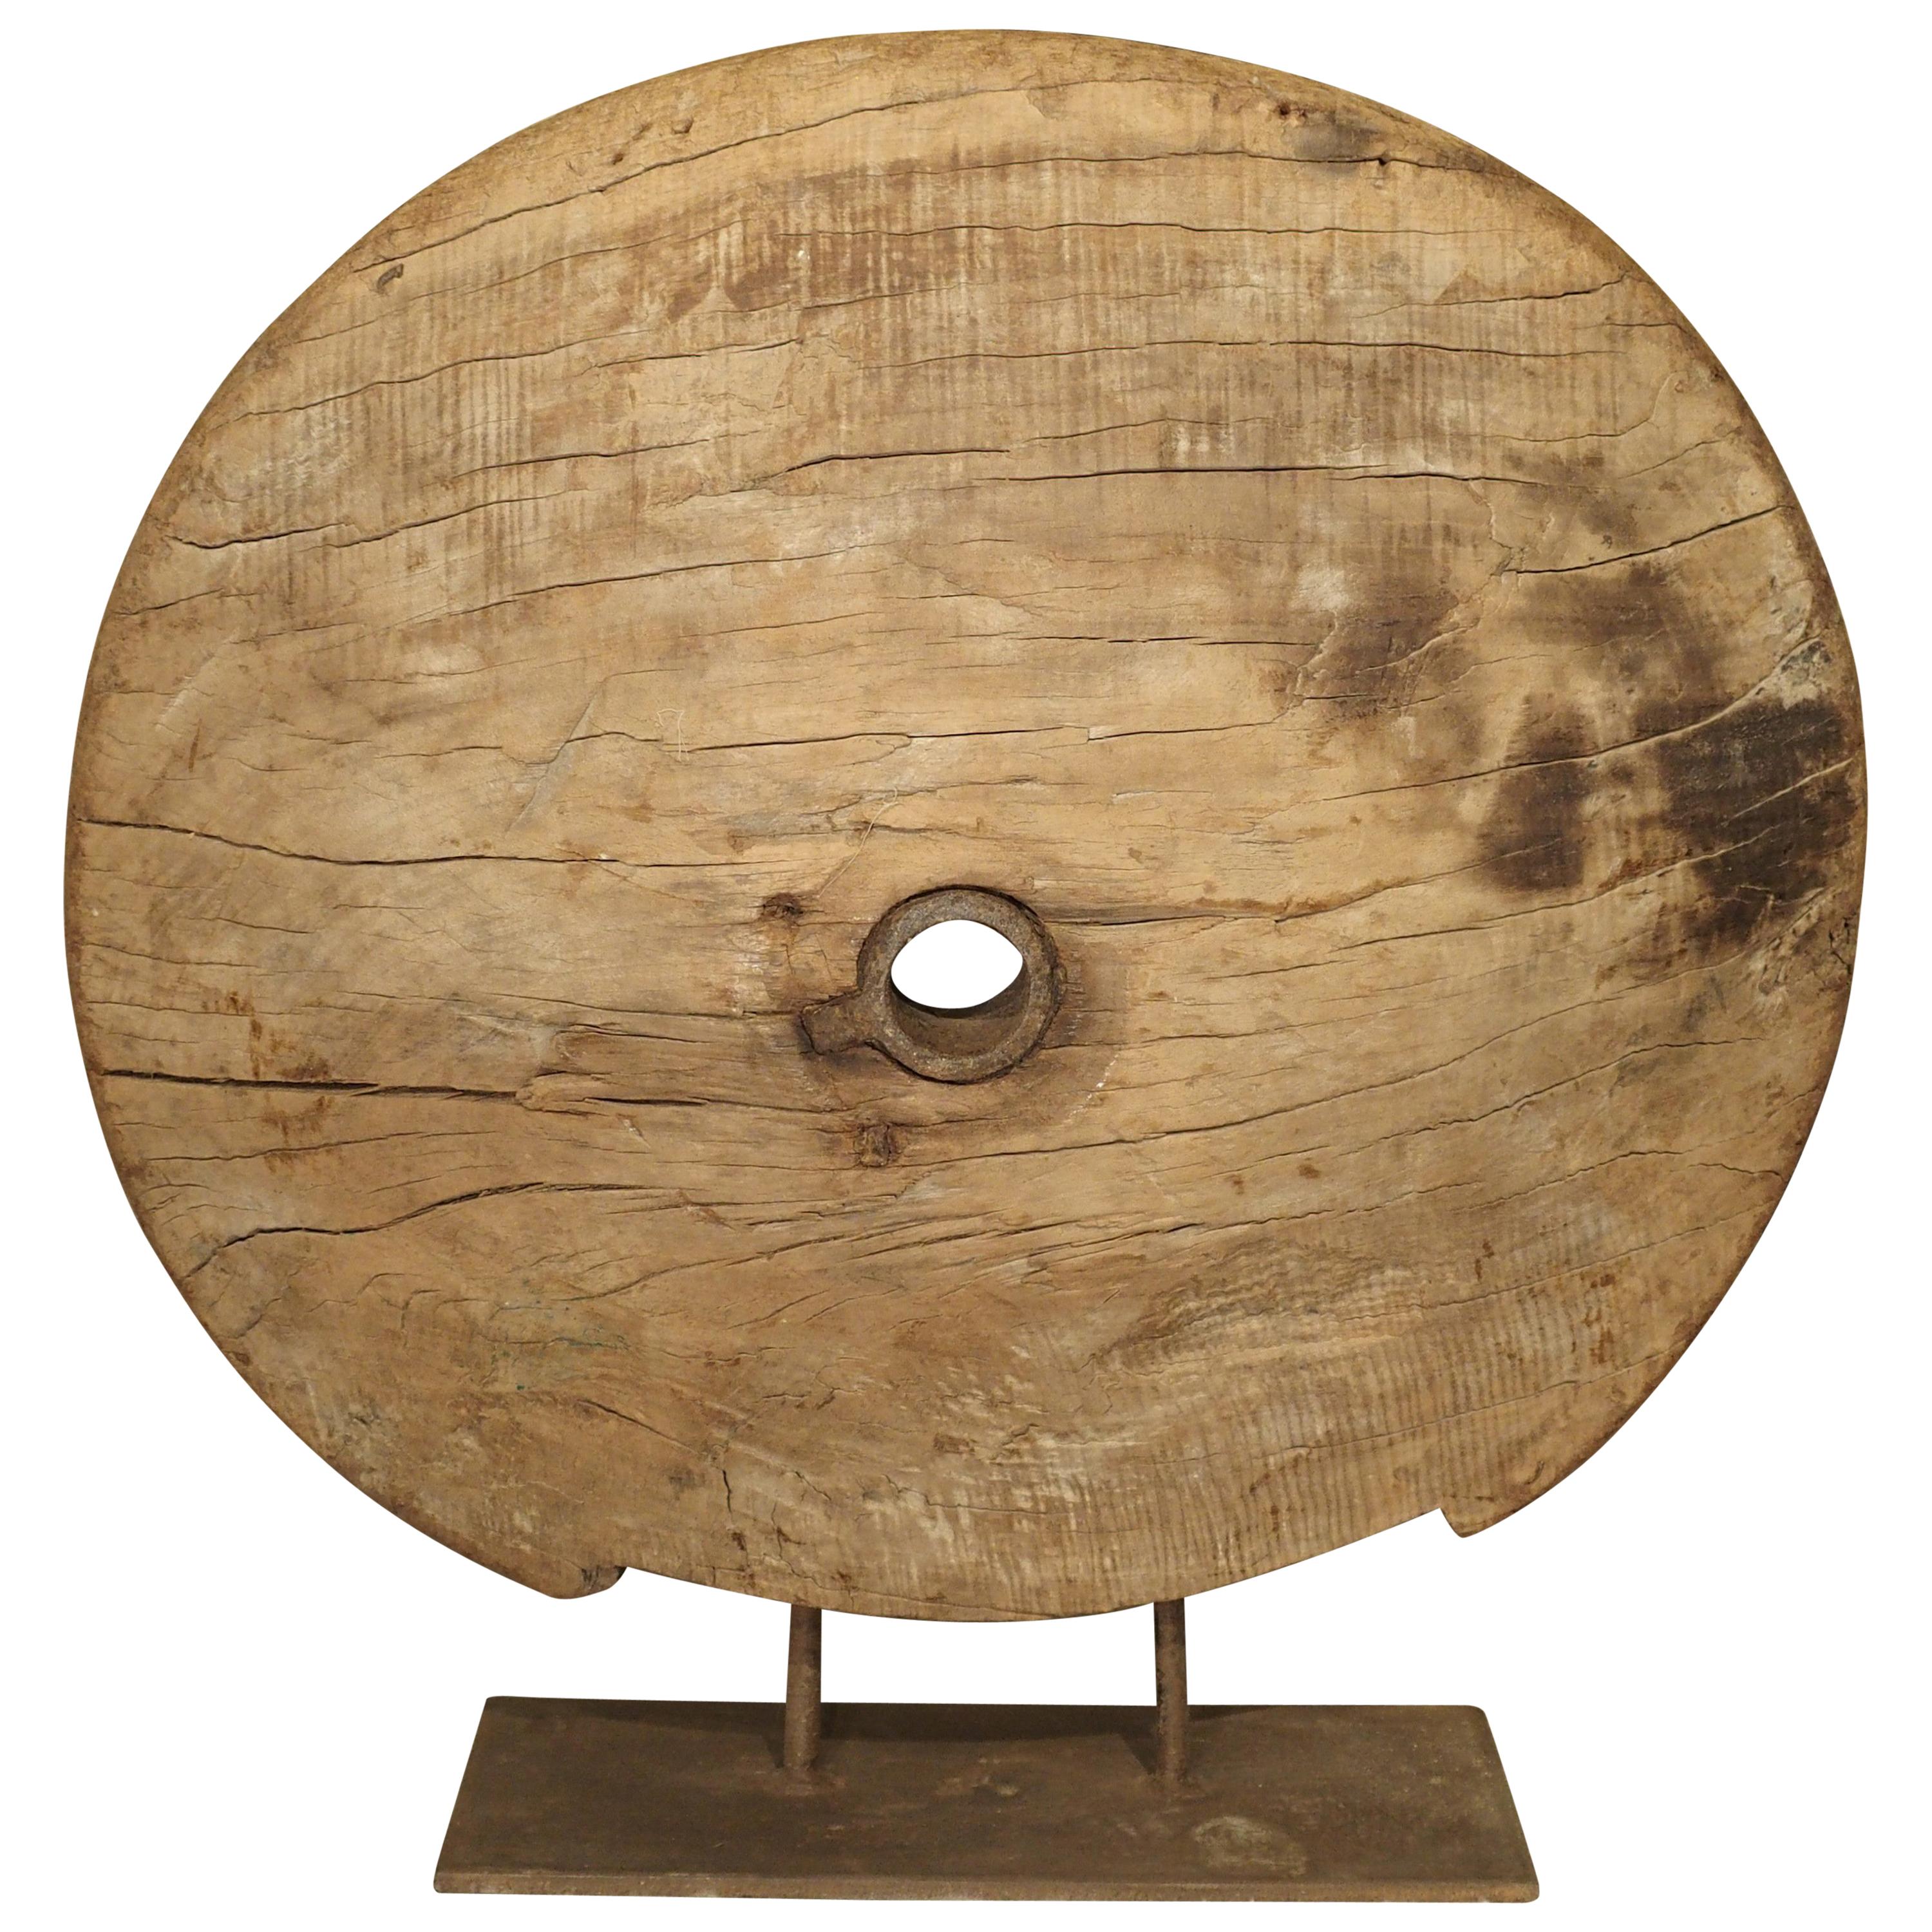 Antique Mounted Wooden Work Wheel from India